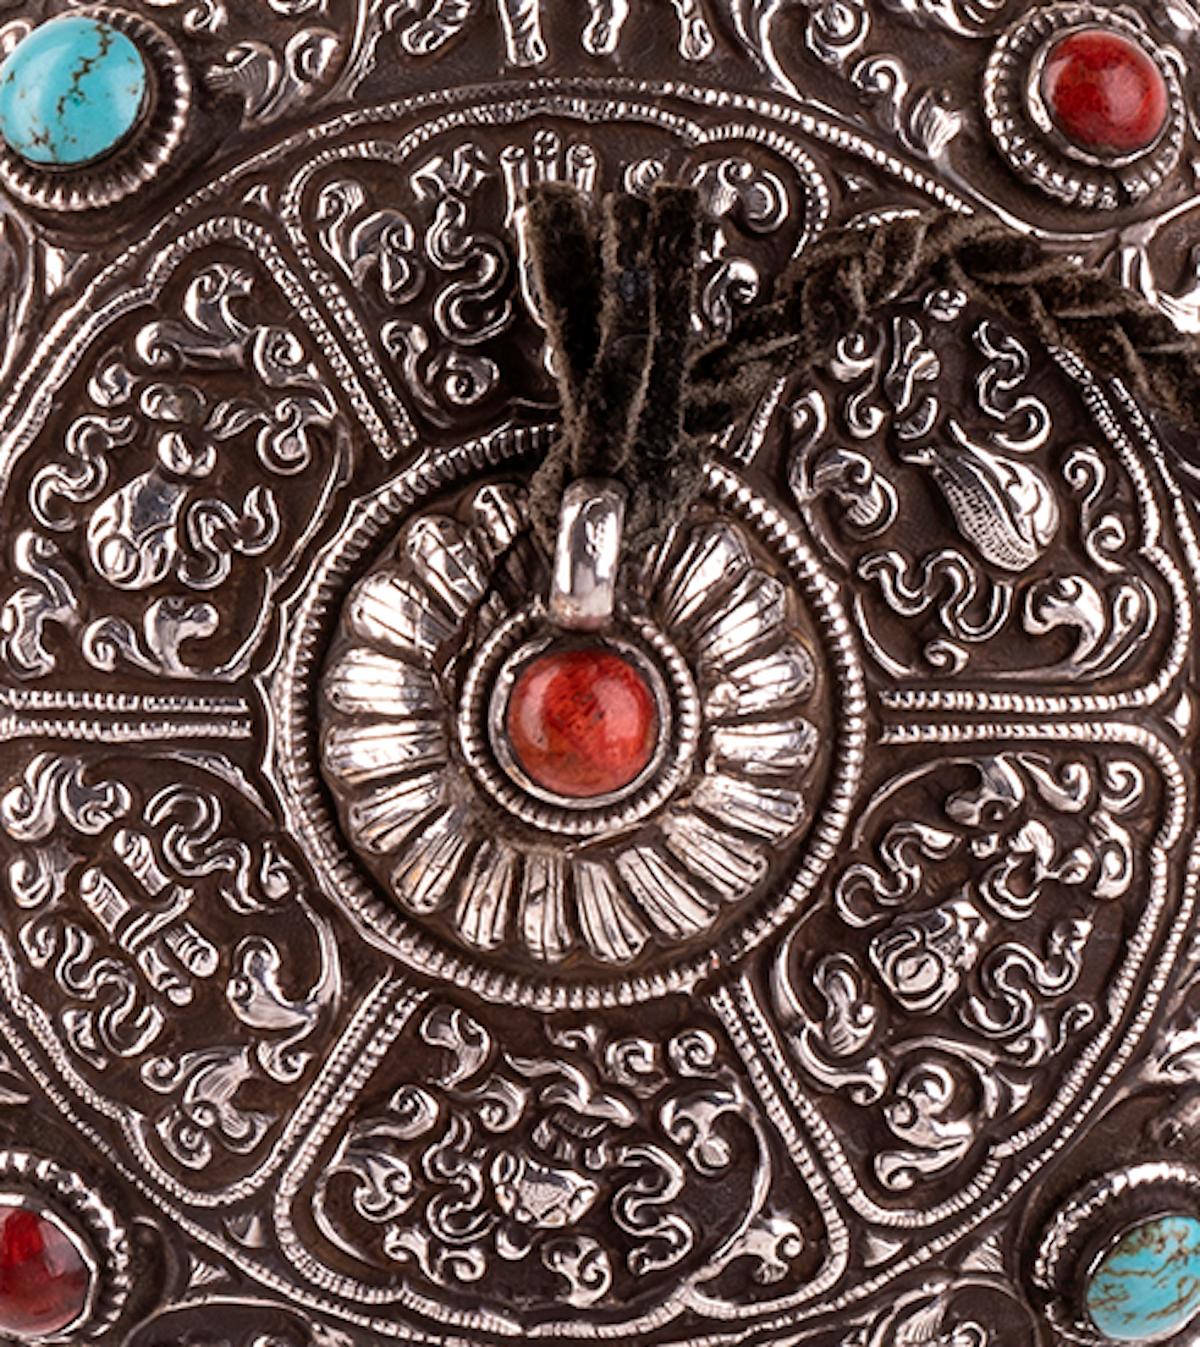 This silver flask is a precious decorative object to smell the tobacco, realized in Tibet in the first half of the 20th century.

Round shaped with central opening, chased and embossed with good luck symbols and set with turquoise and coral